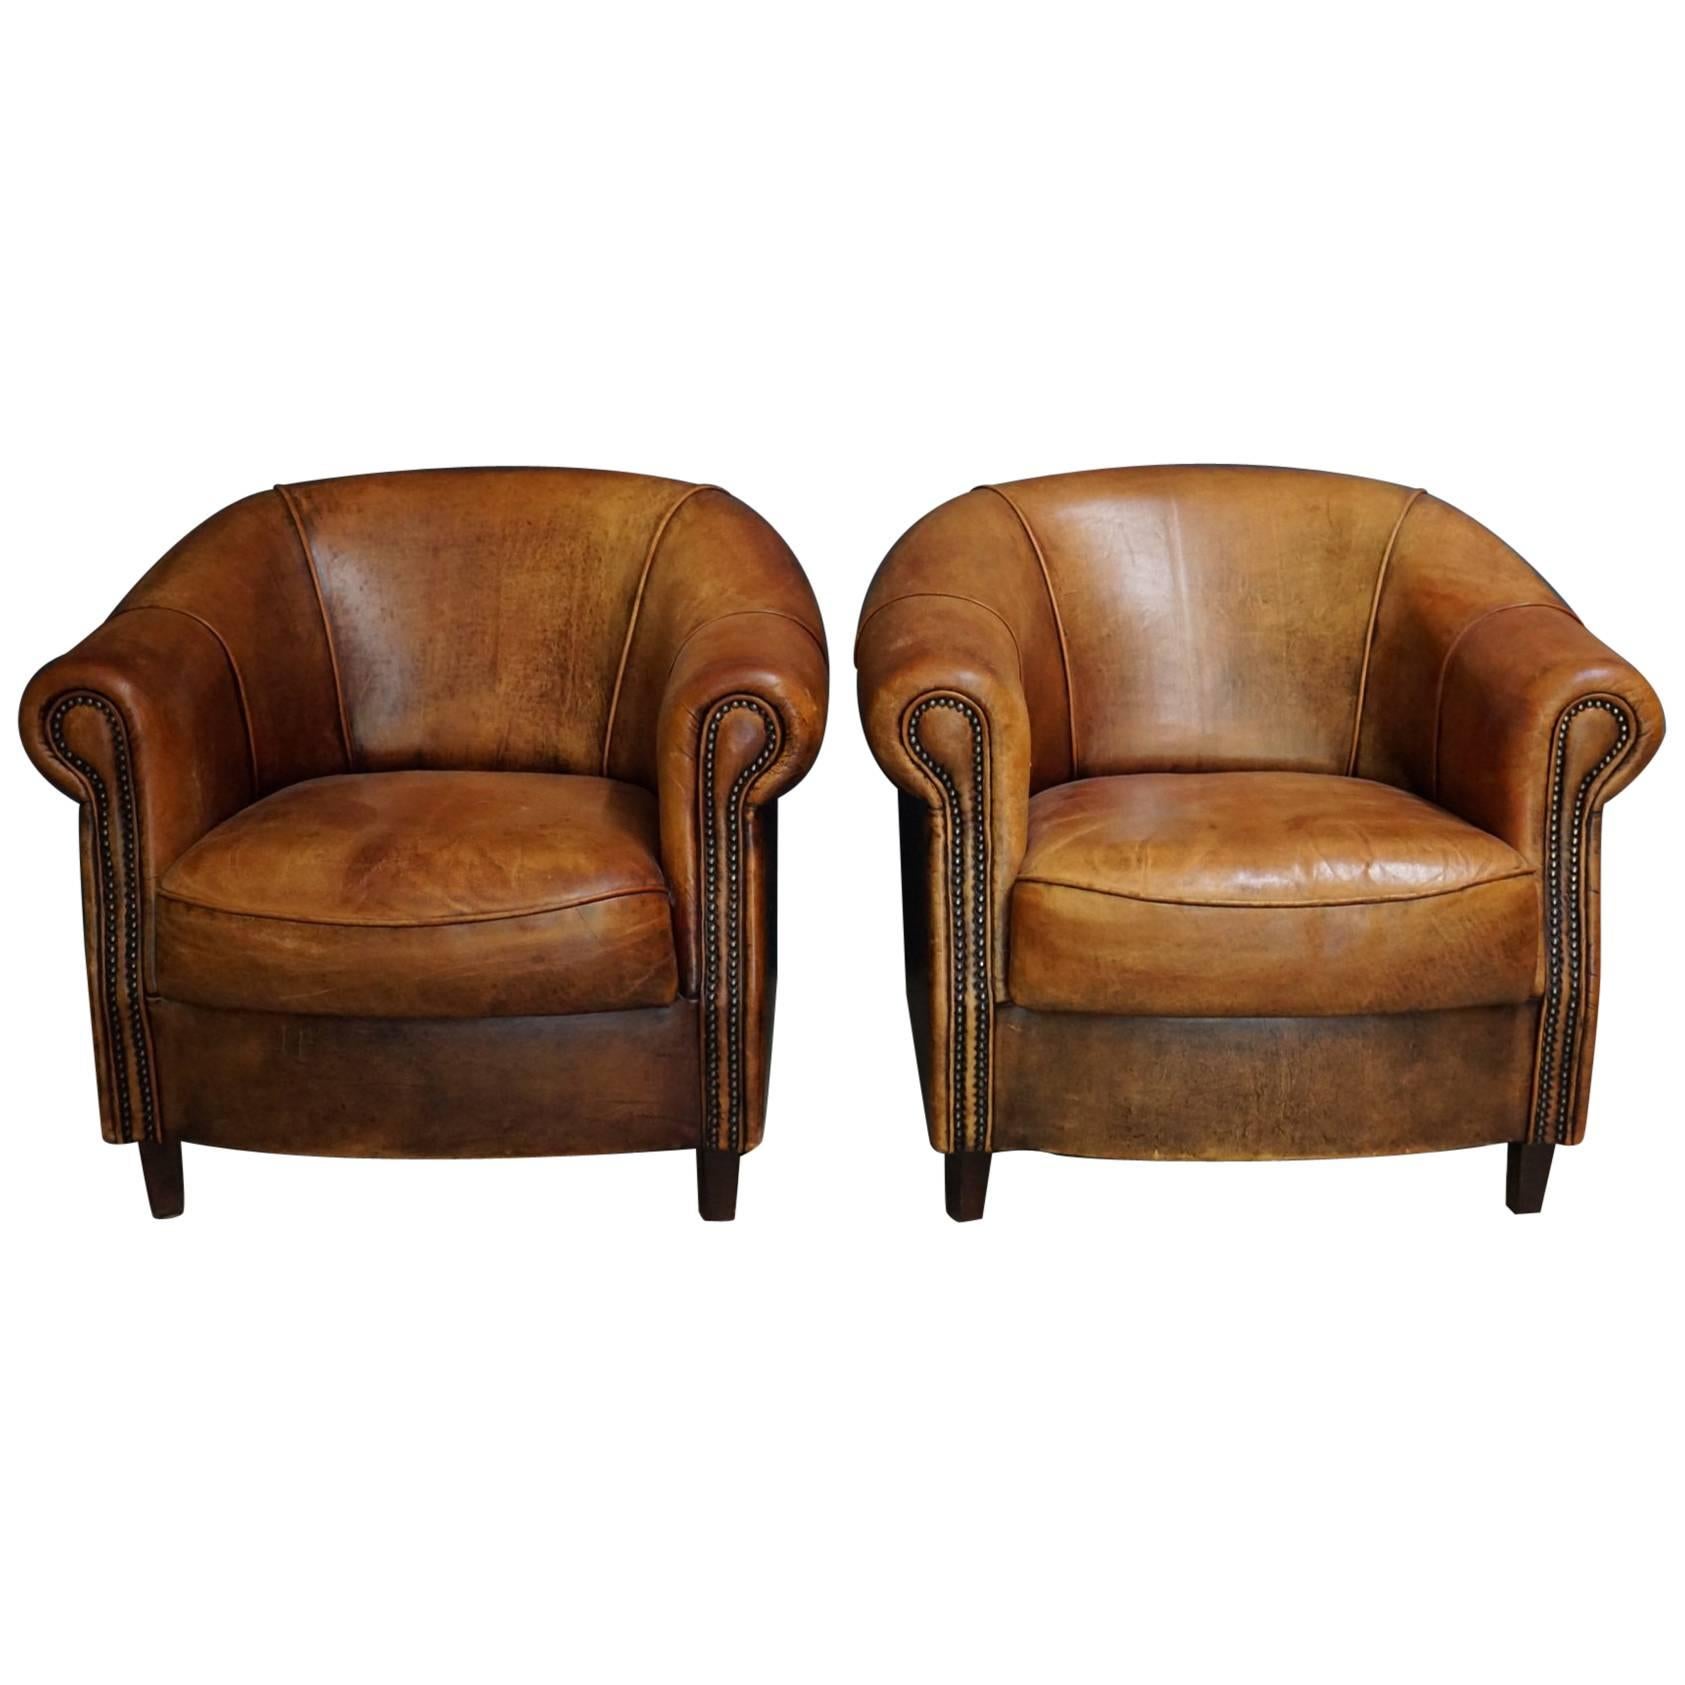 Vintage Dutch Cognac Leather Club Chairs, Set of Two